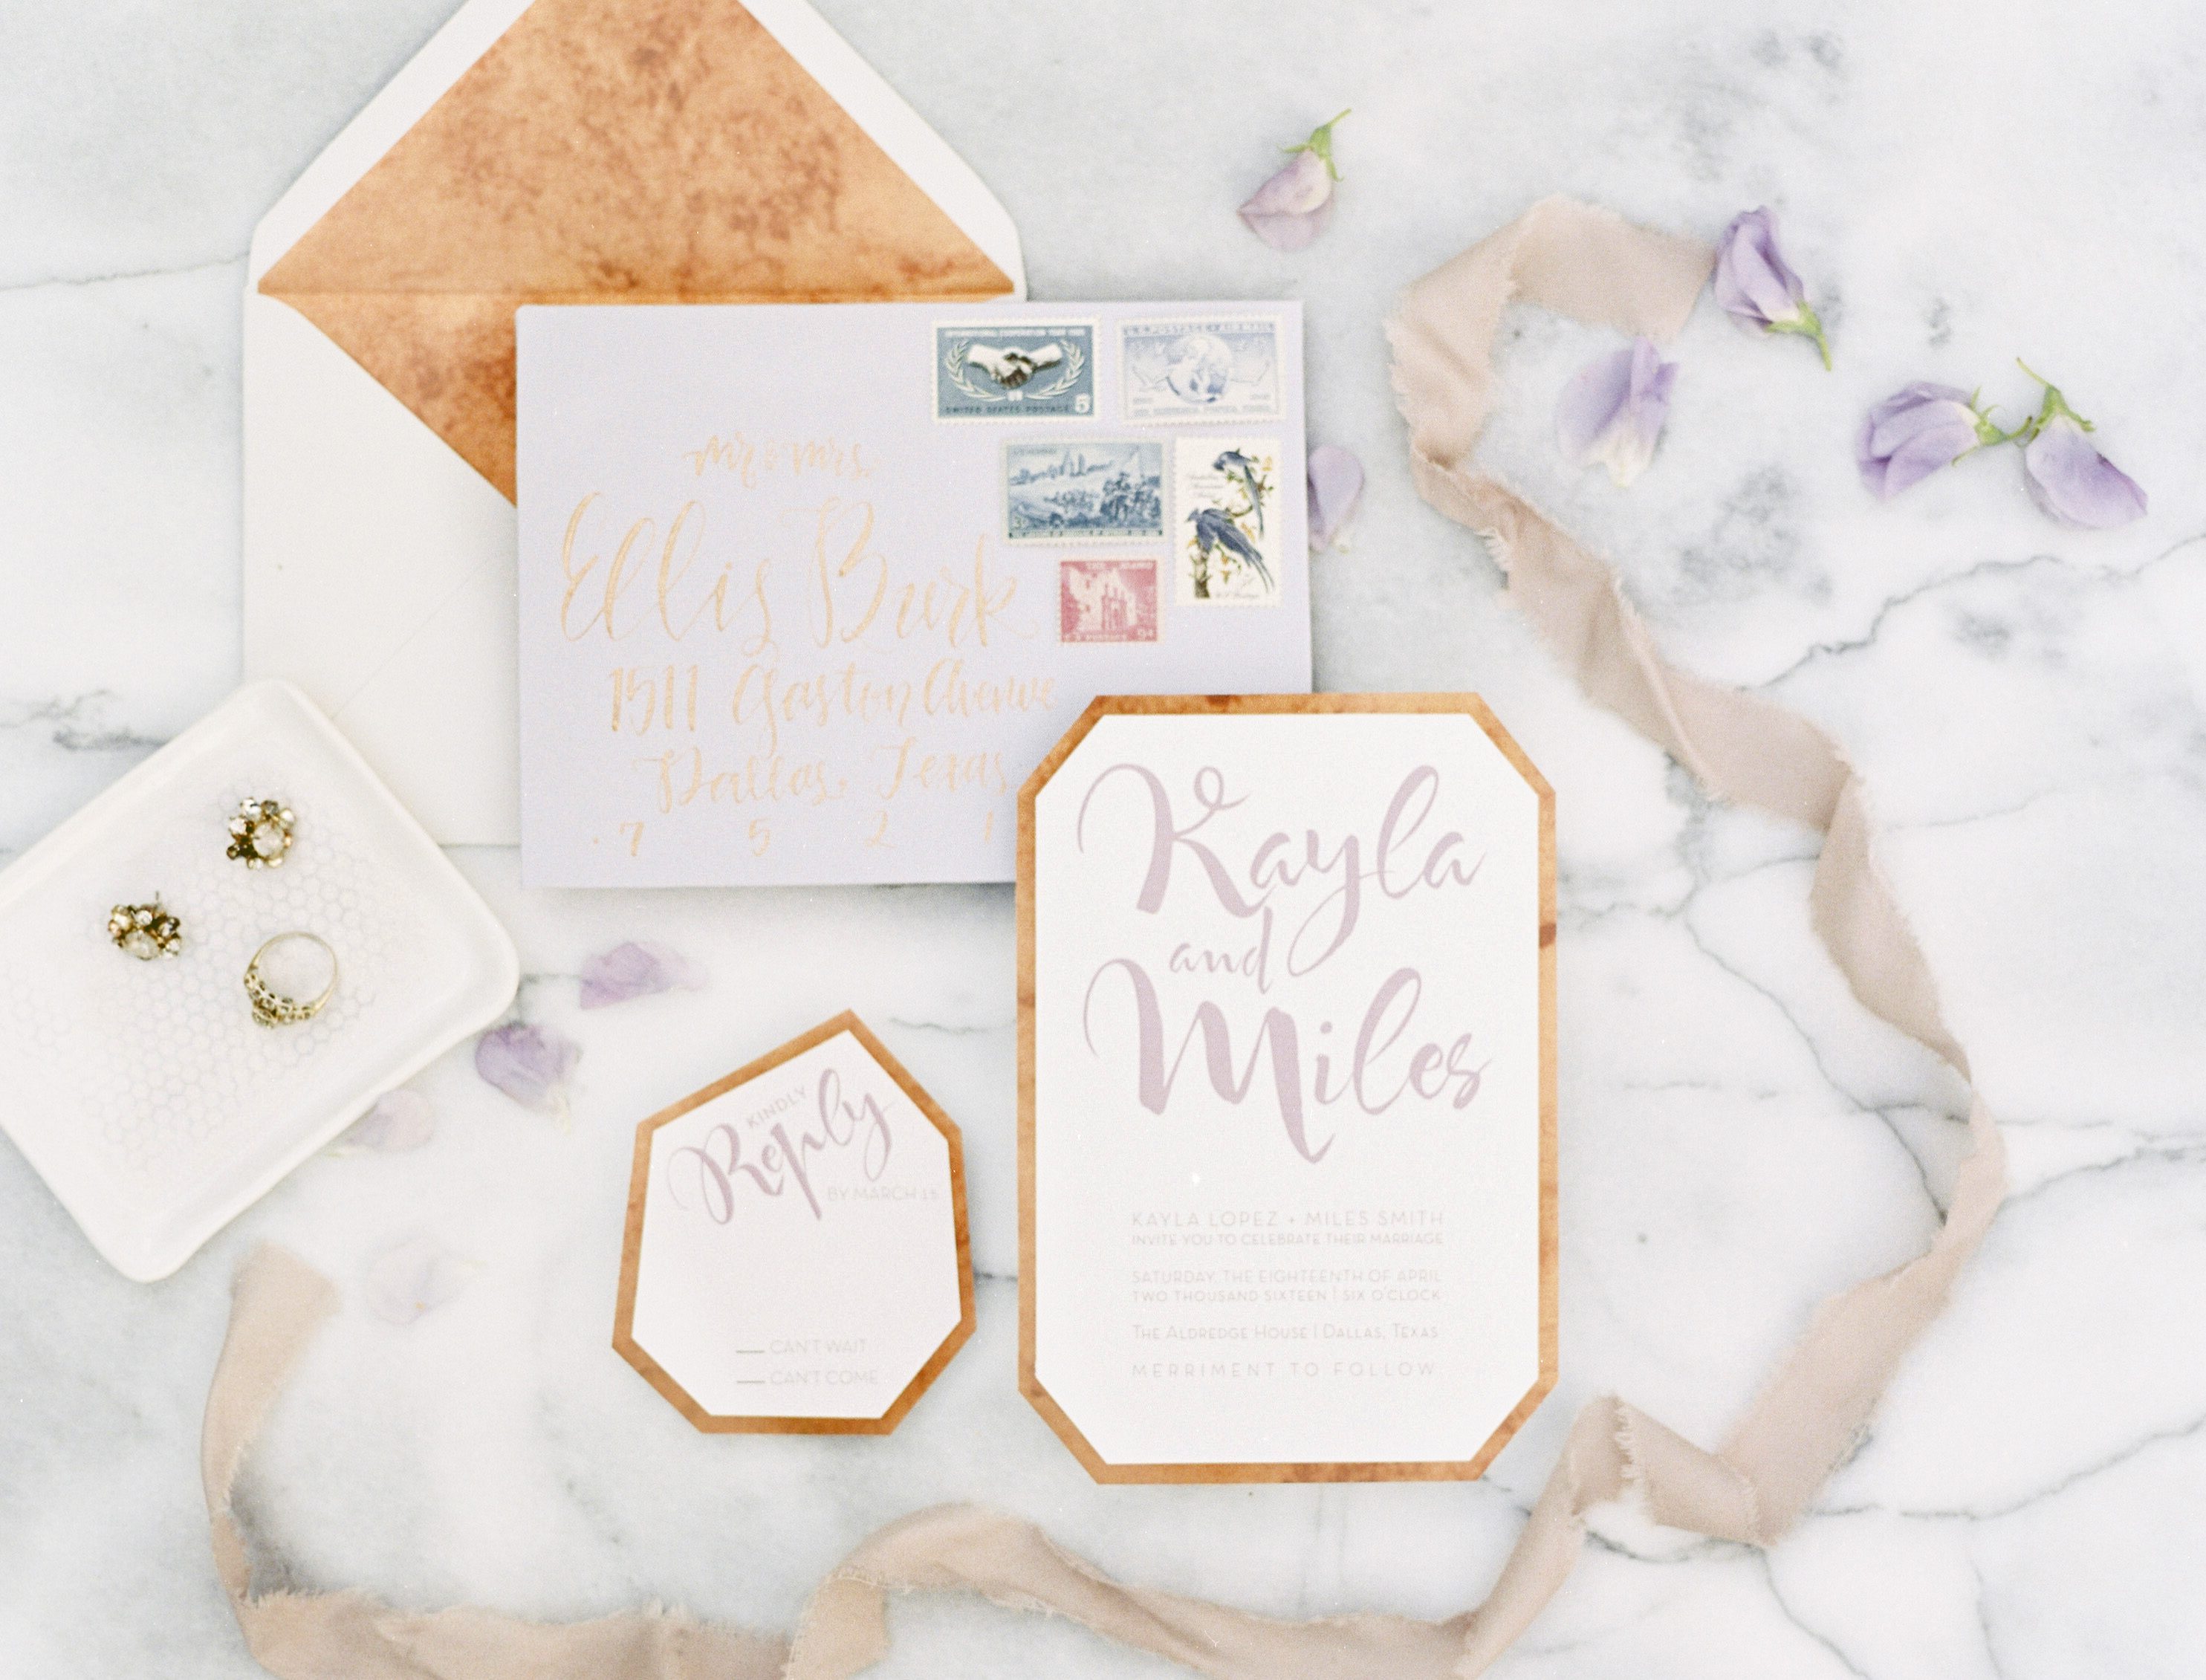 geometric invitation suite styled on marble at a lavender and copper wedding